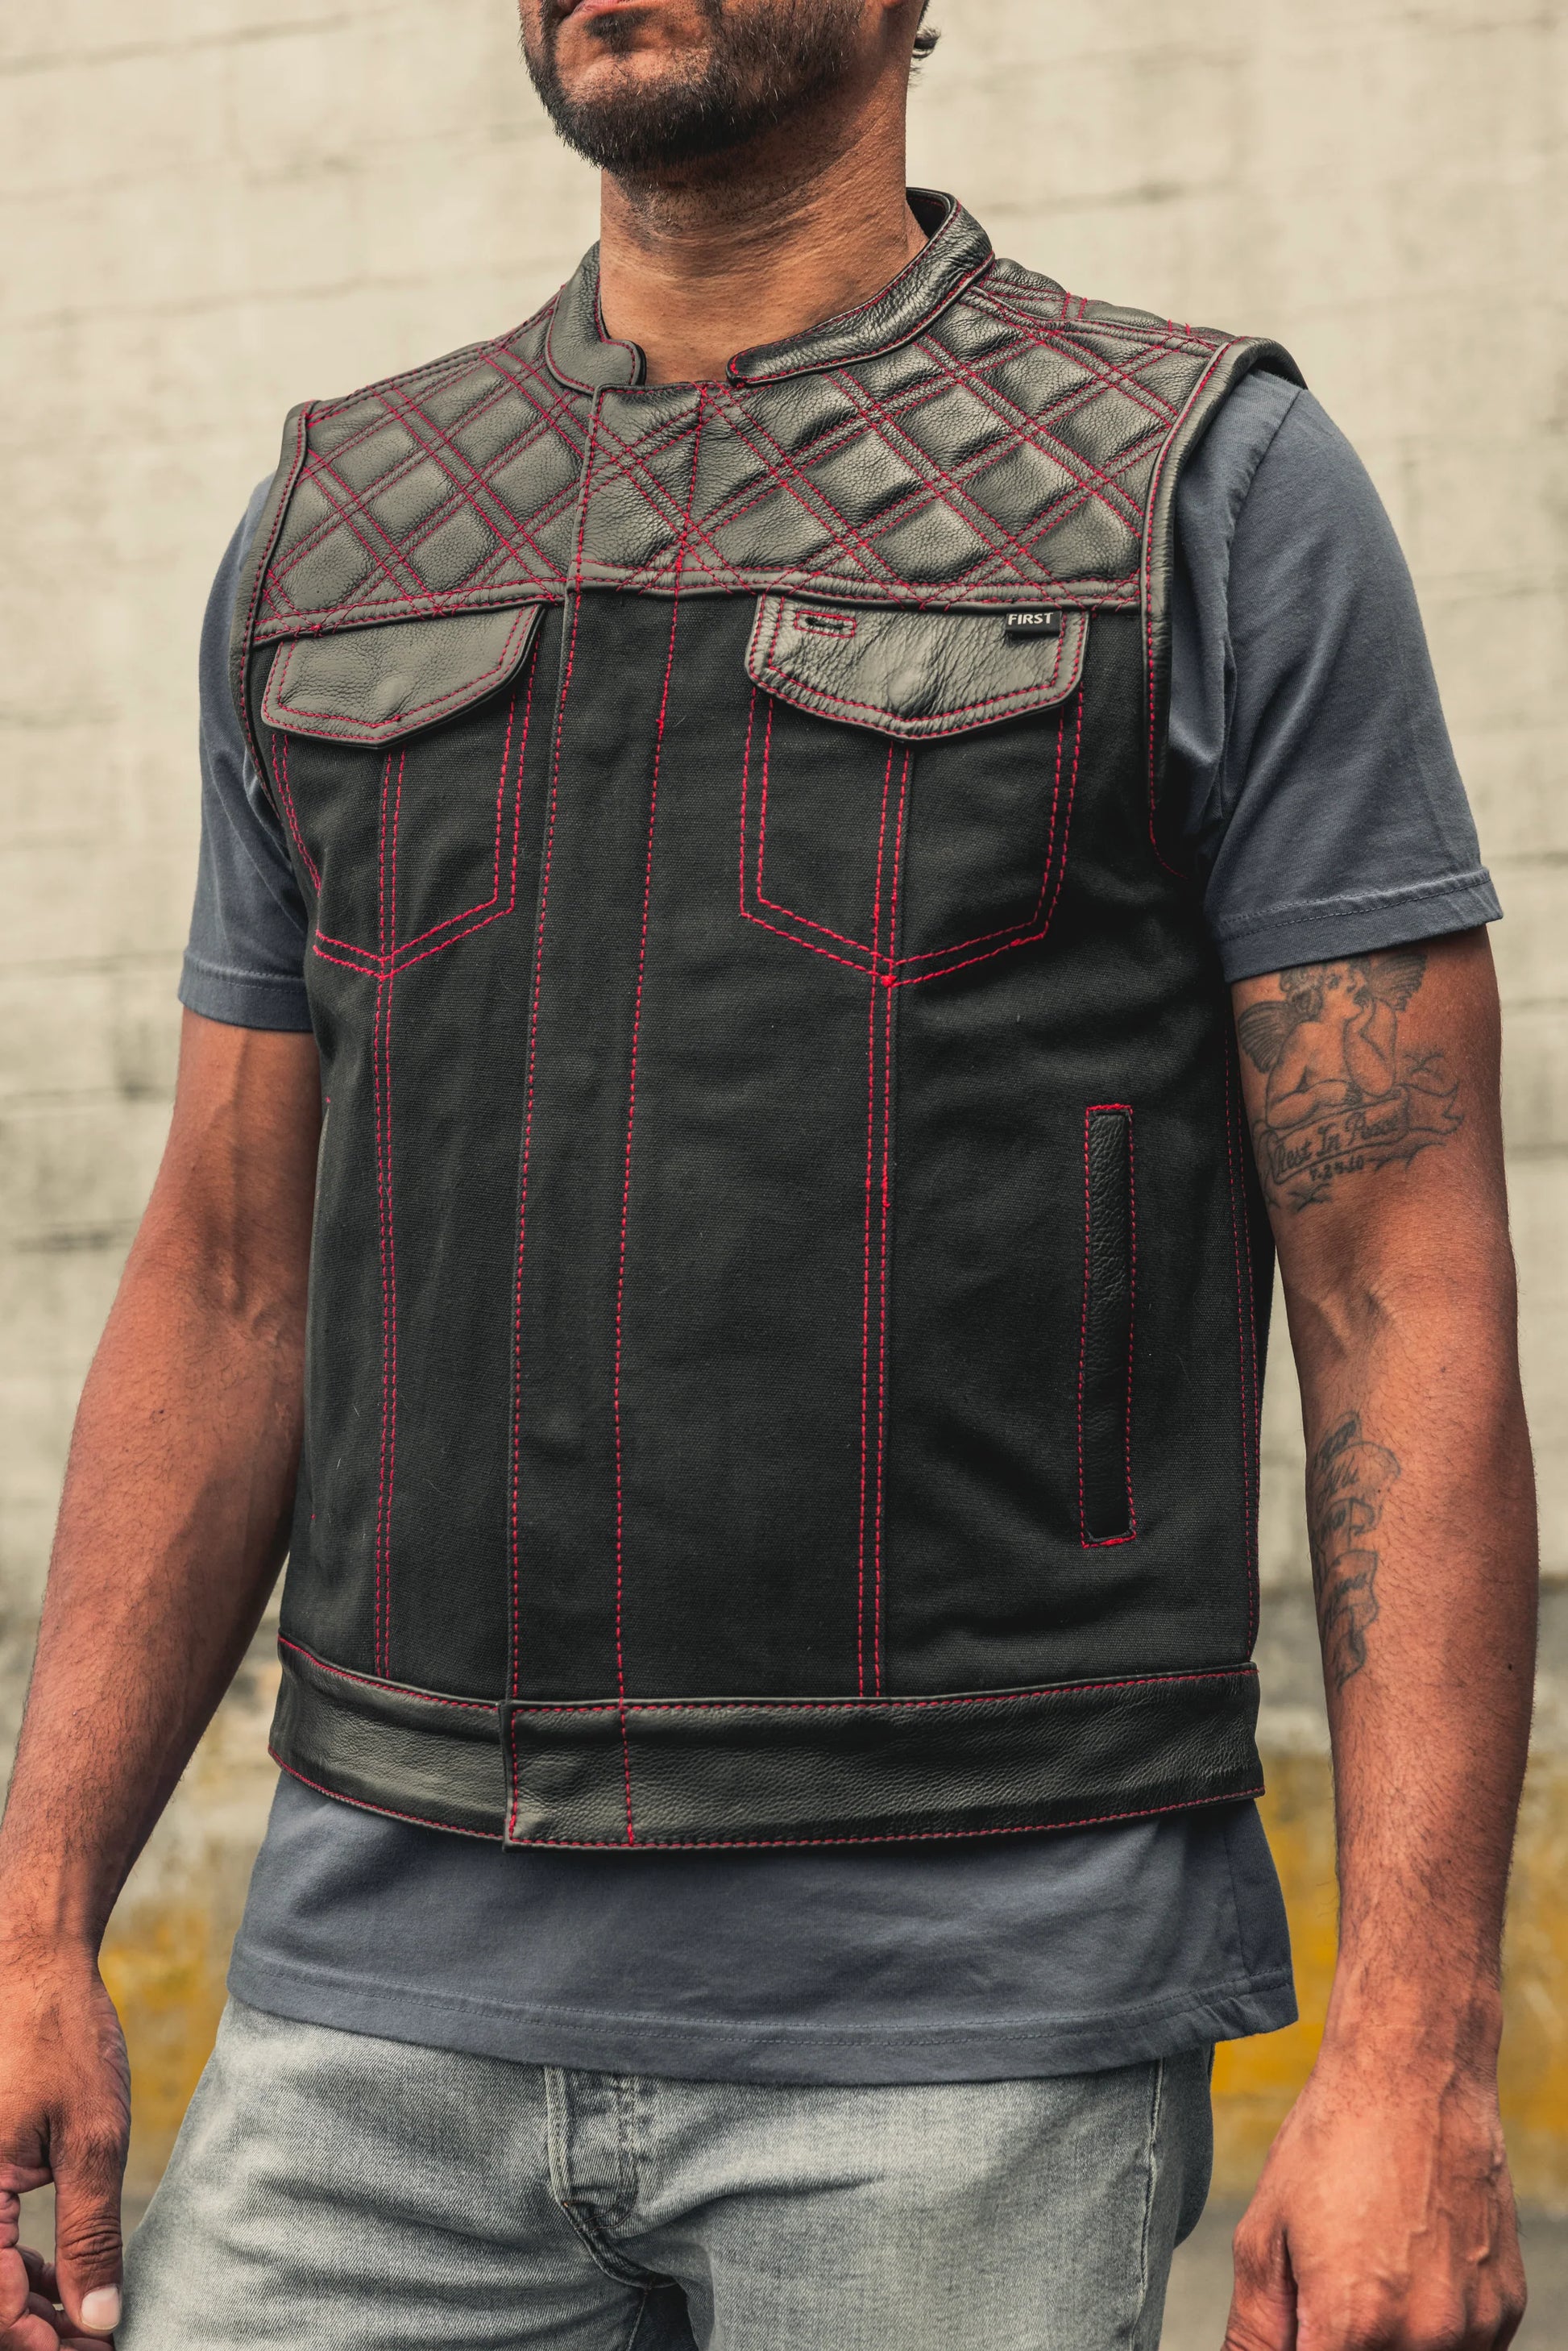 Confident Style: Man Wearing Stylish Club Vest, Concealed Carry, Black Canvas